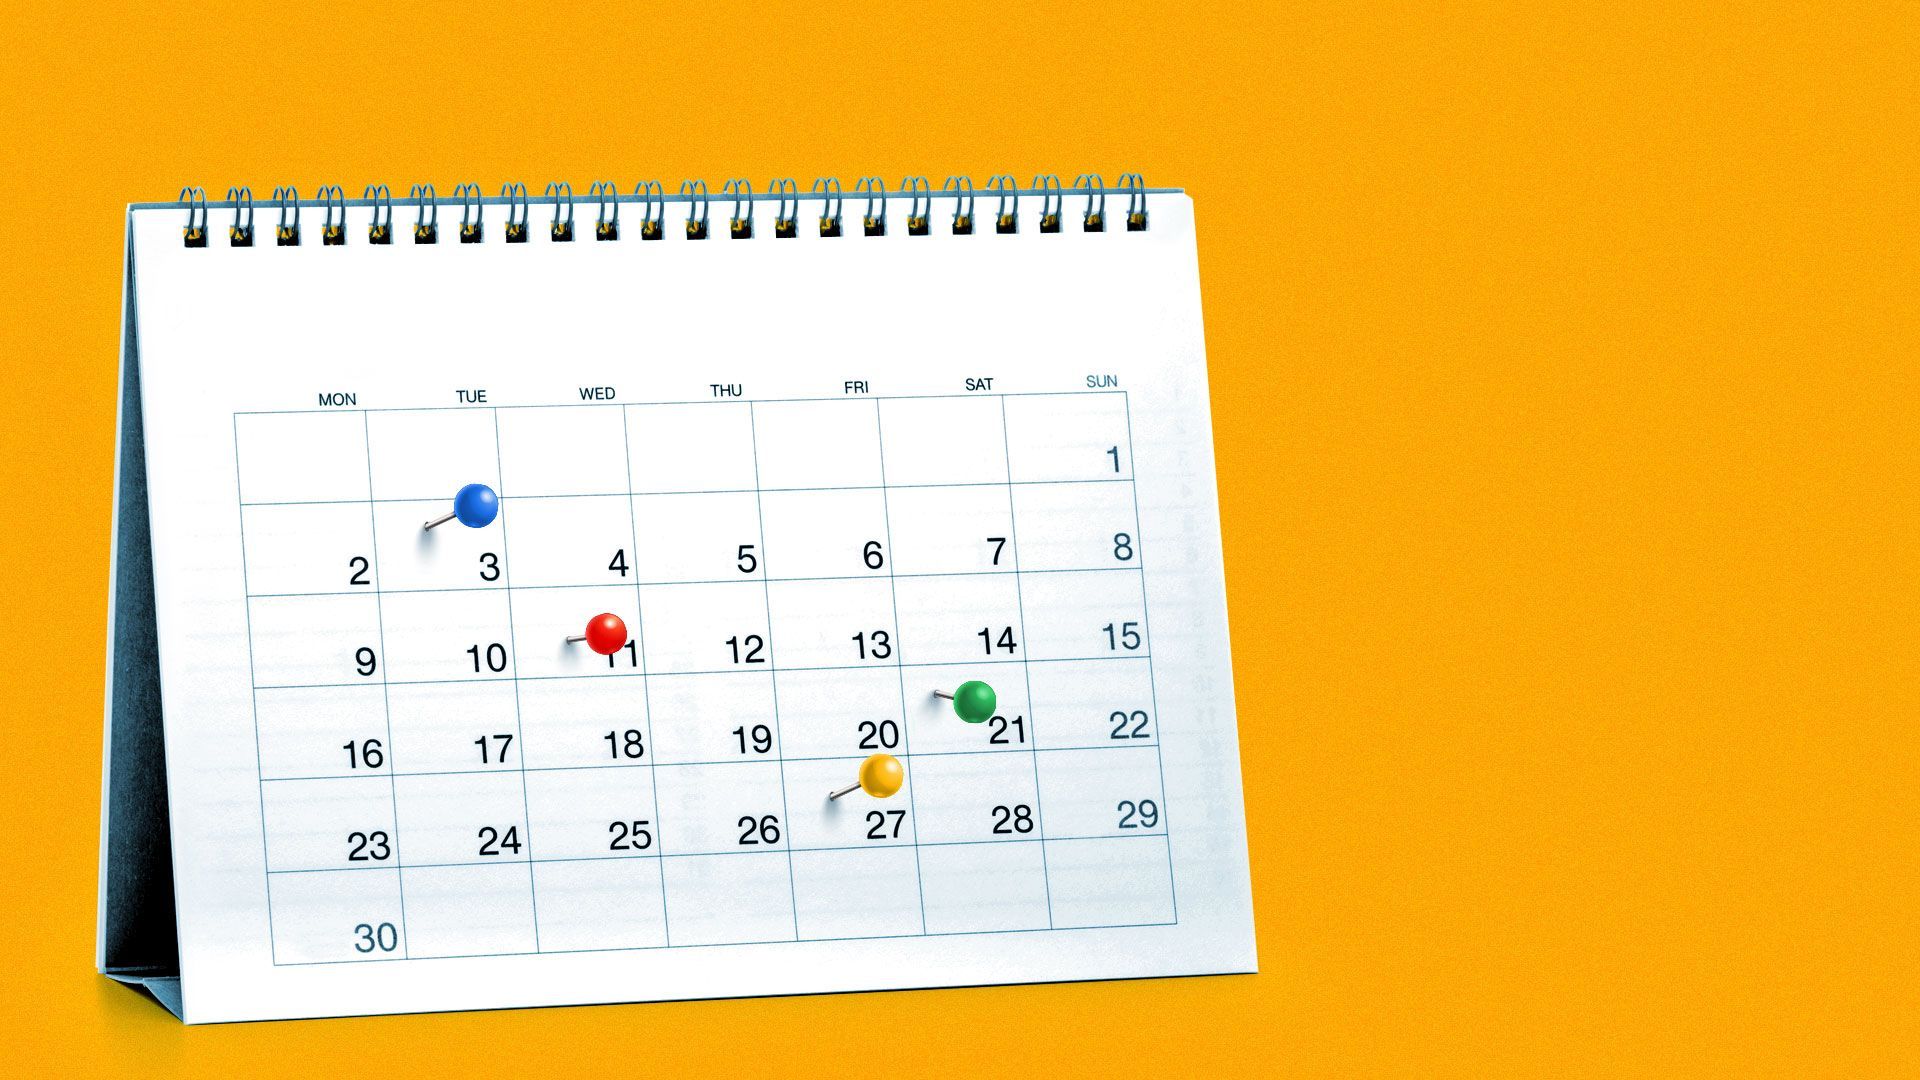 Illustration of a standing desk calendar with a blue pin, a red pin, a yellow pin, and a green pin.